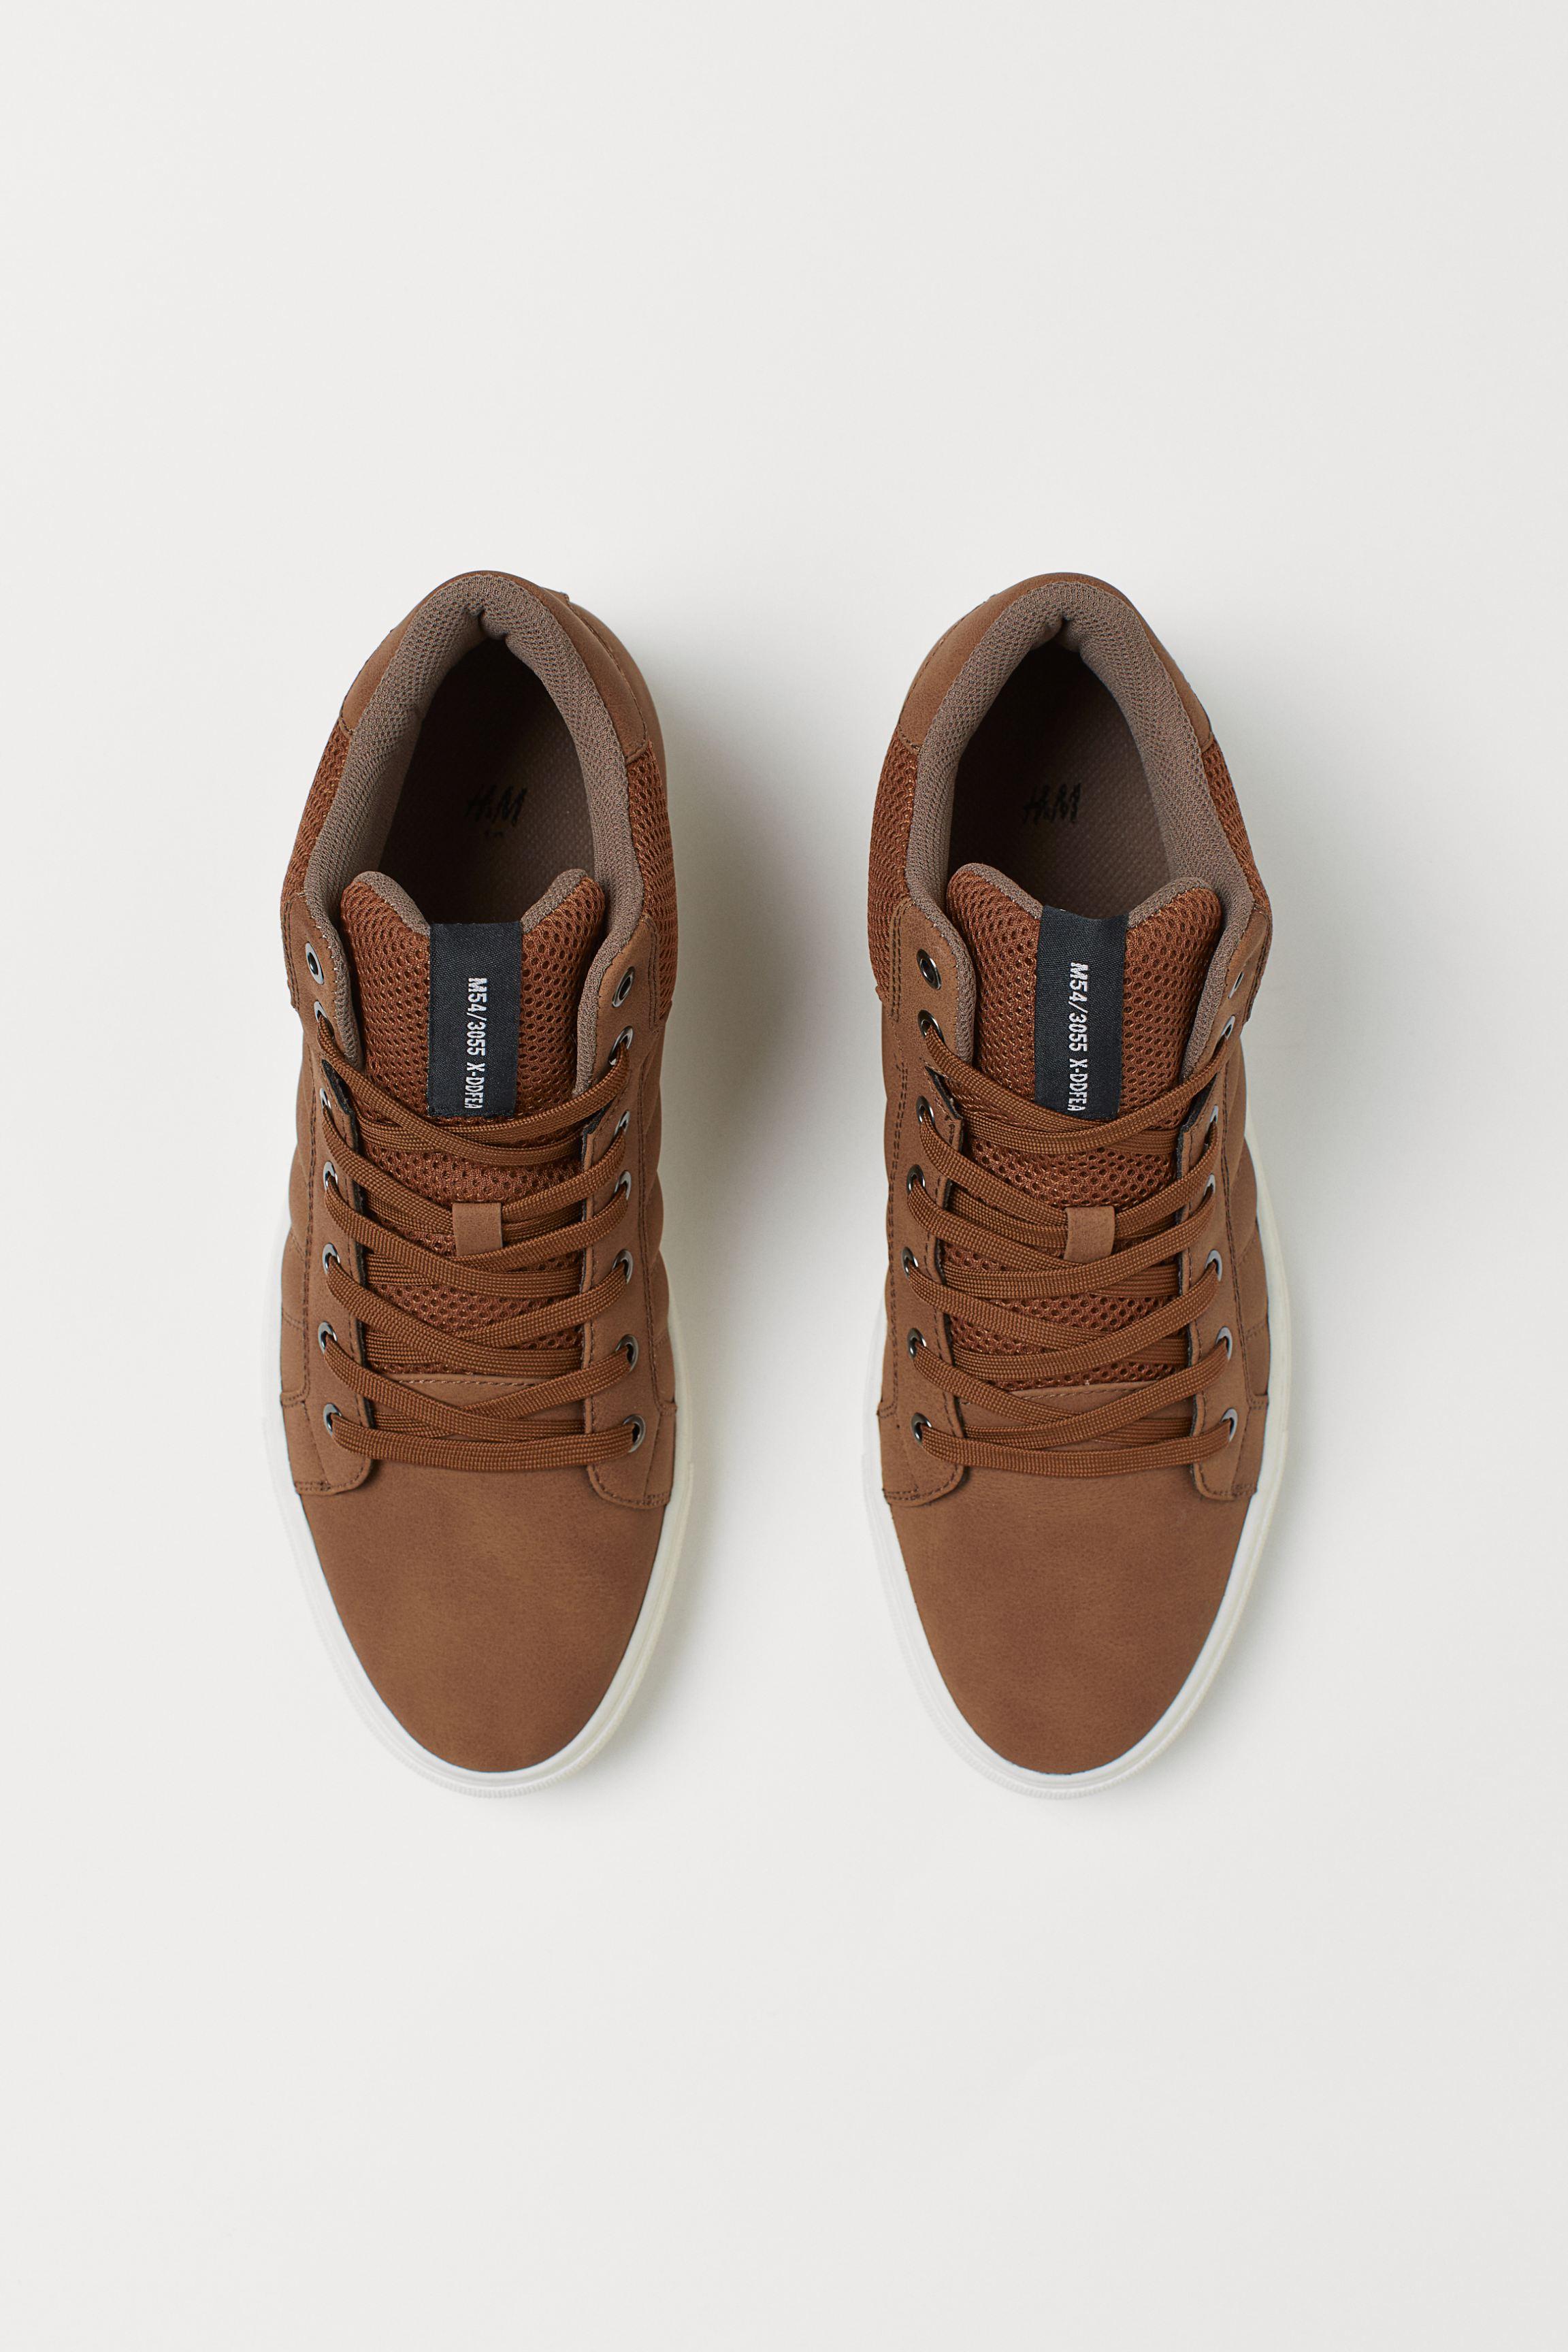 H&M High Tops in Brown for Men | Lyst